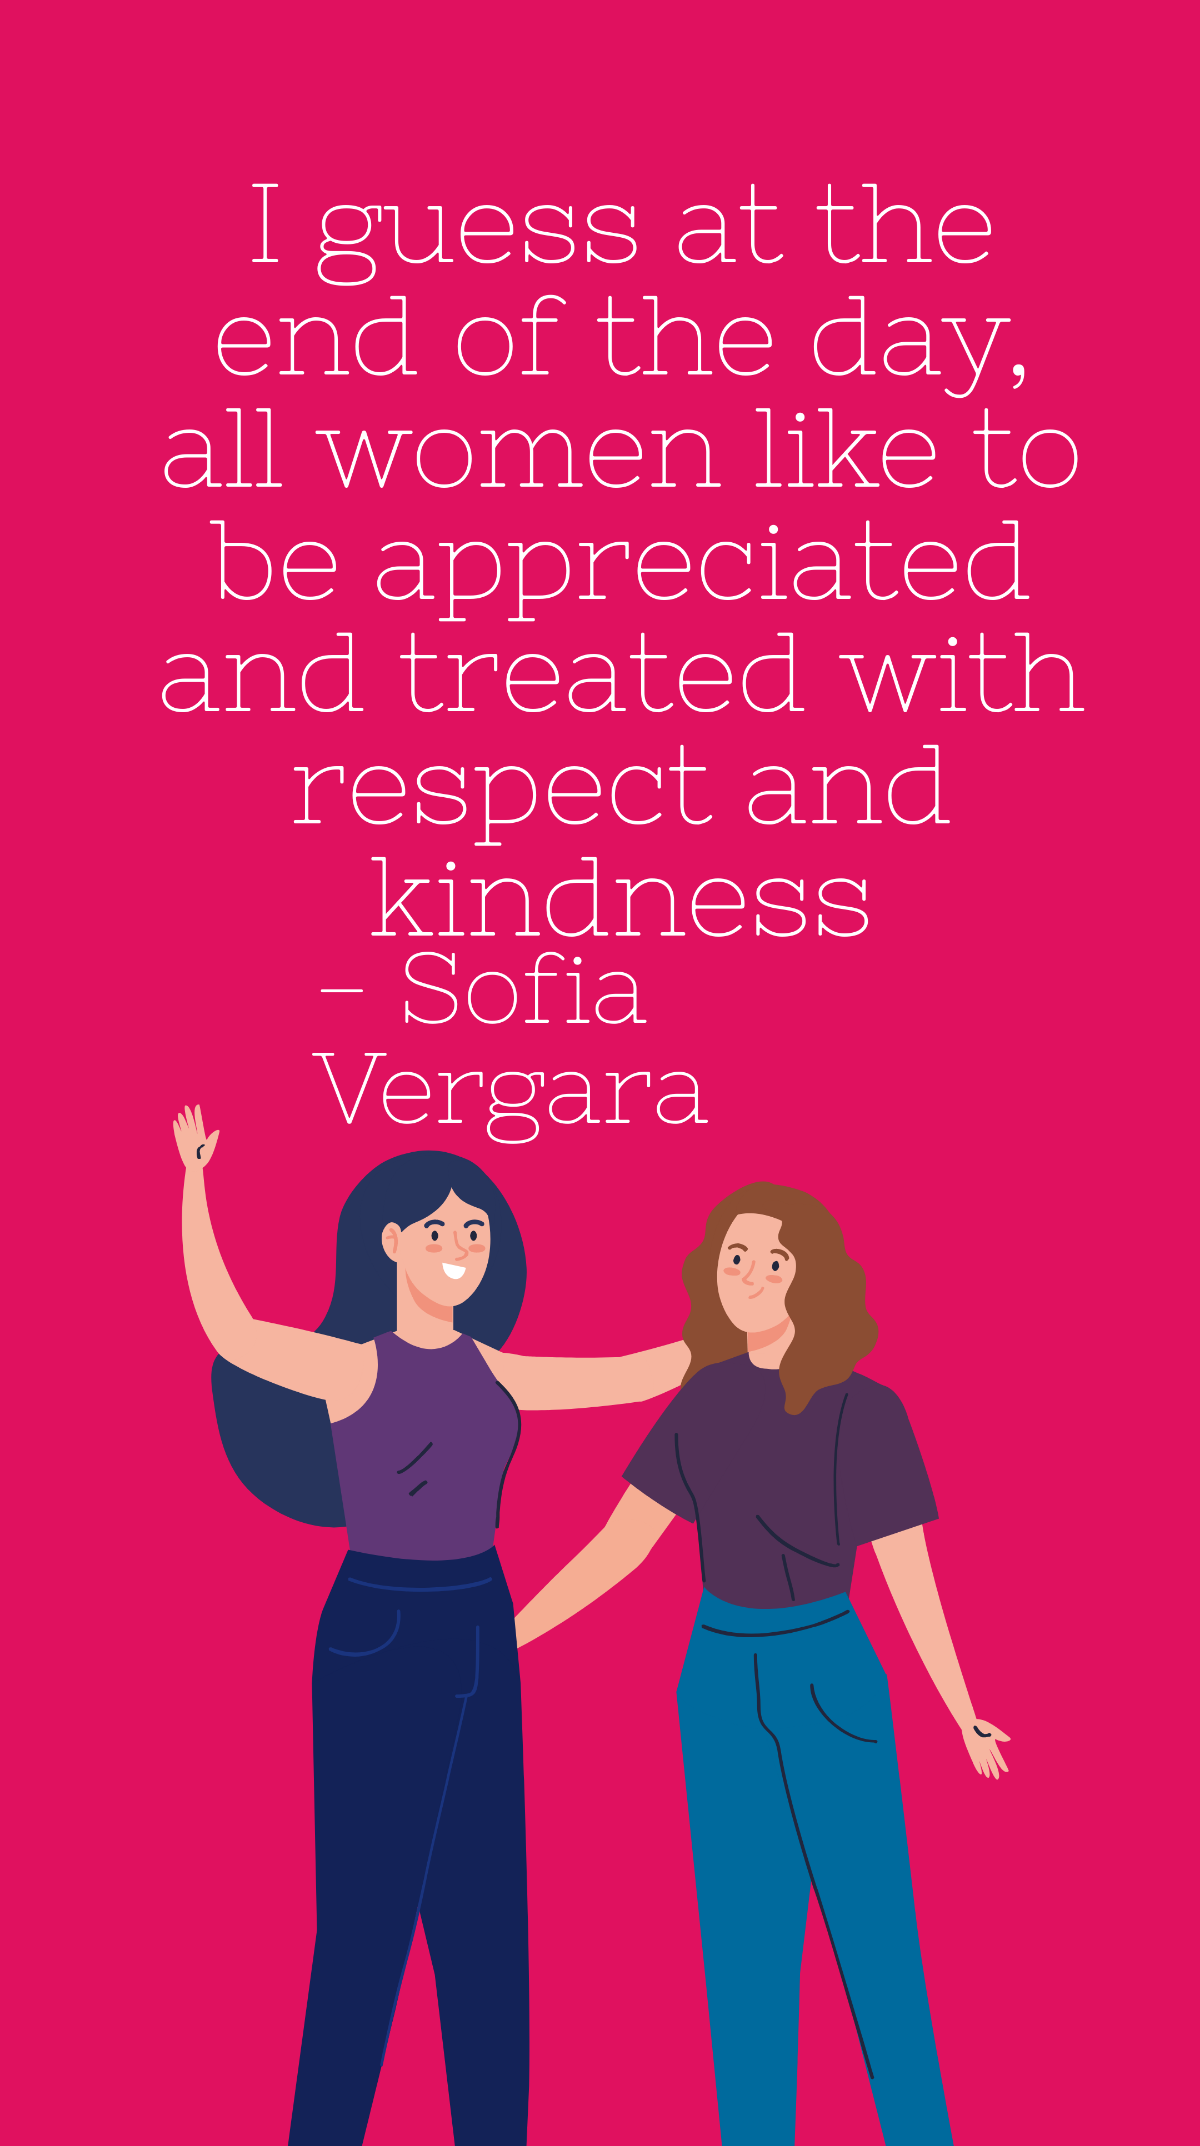 Free Sofia Vergara - I guess at the end of the day, all women like to be appreciated and treated with respect and kindness Template